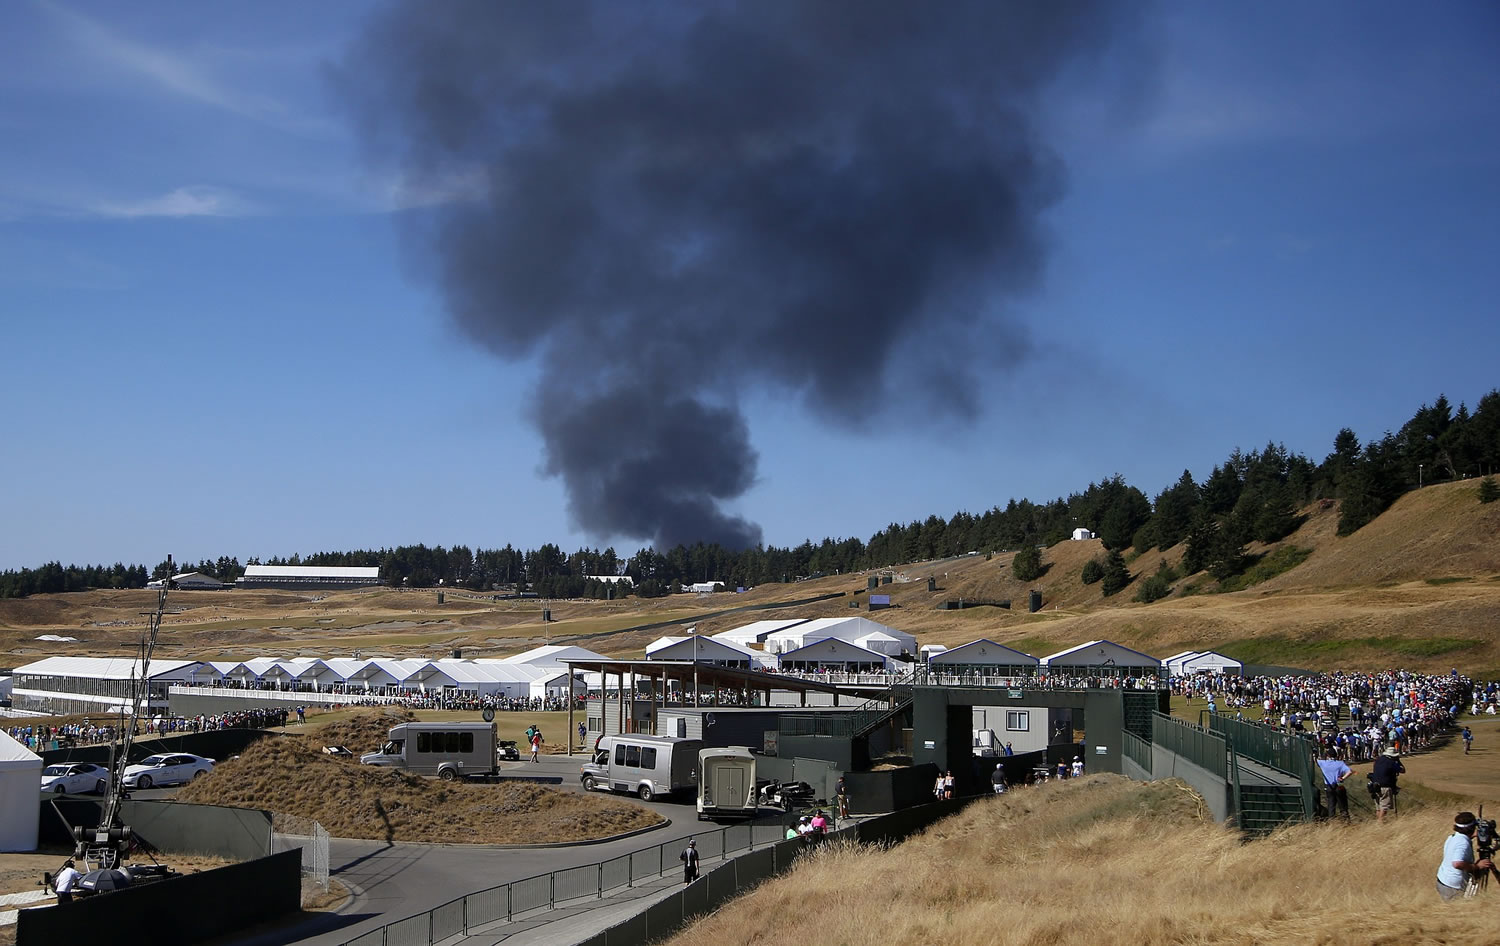 Smoke from a structure fire a few miles from the golf course rises during the third round of the U.S. Open at Chambers Bay on Saturday in University Place. The fire at a marine repair facility was contained within an hour.